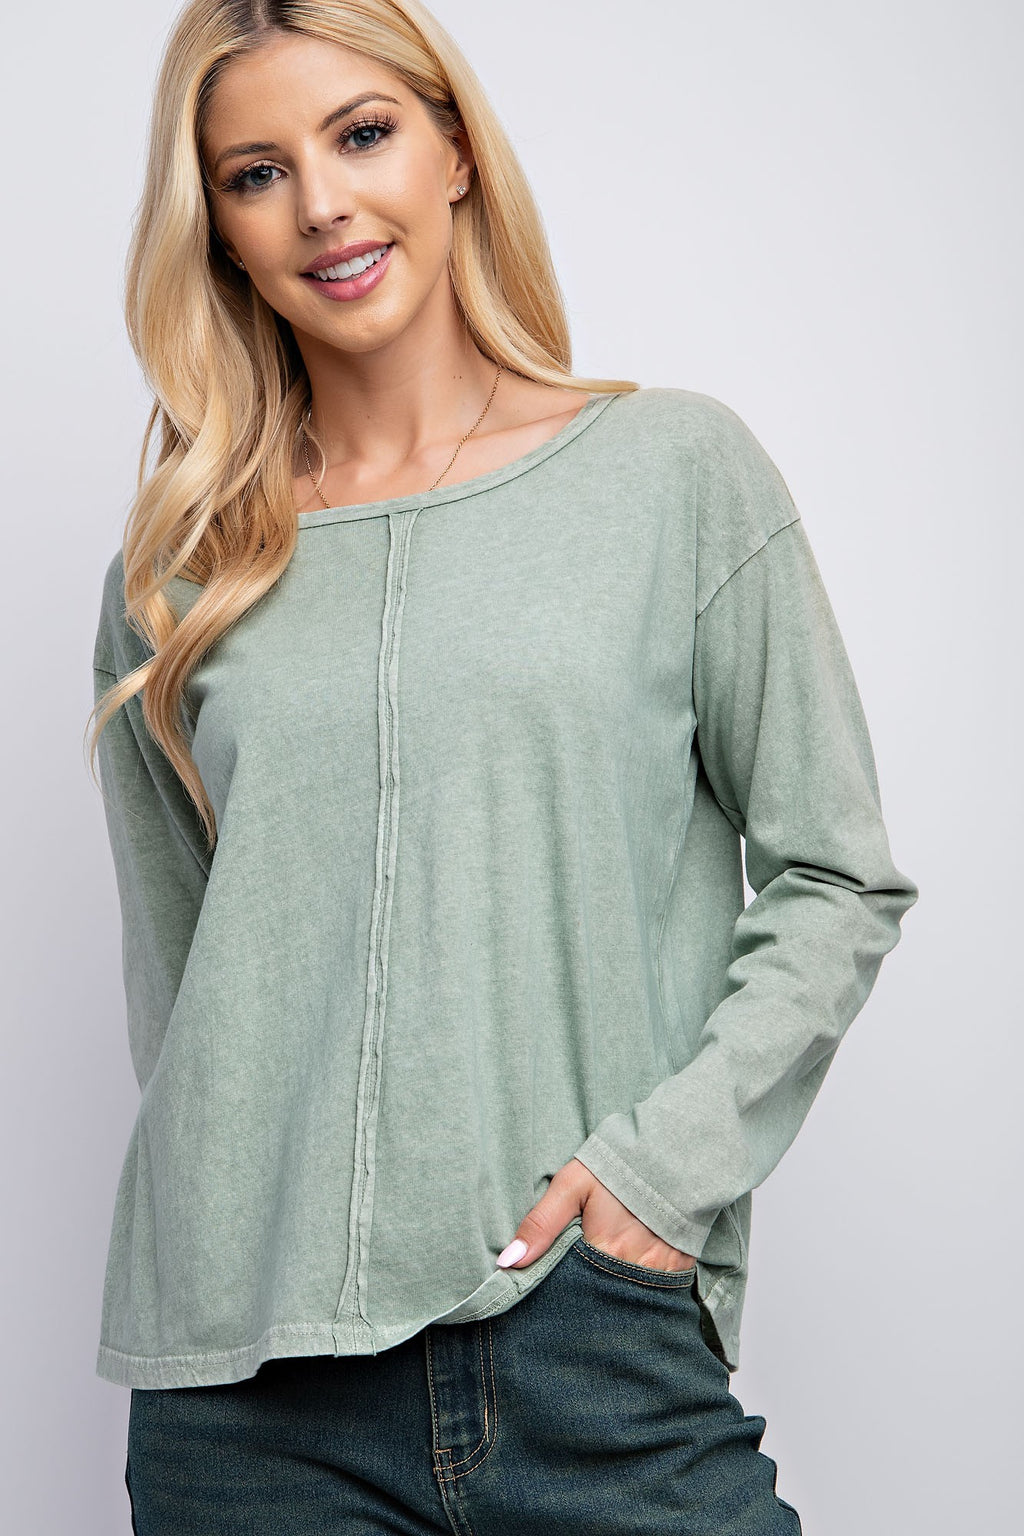 Simply Sage Long Sleeve Top - Catching Fireflies Boutique